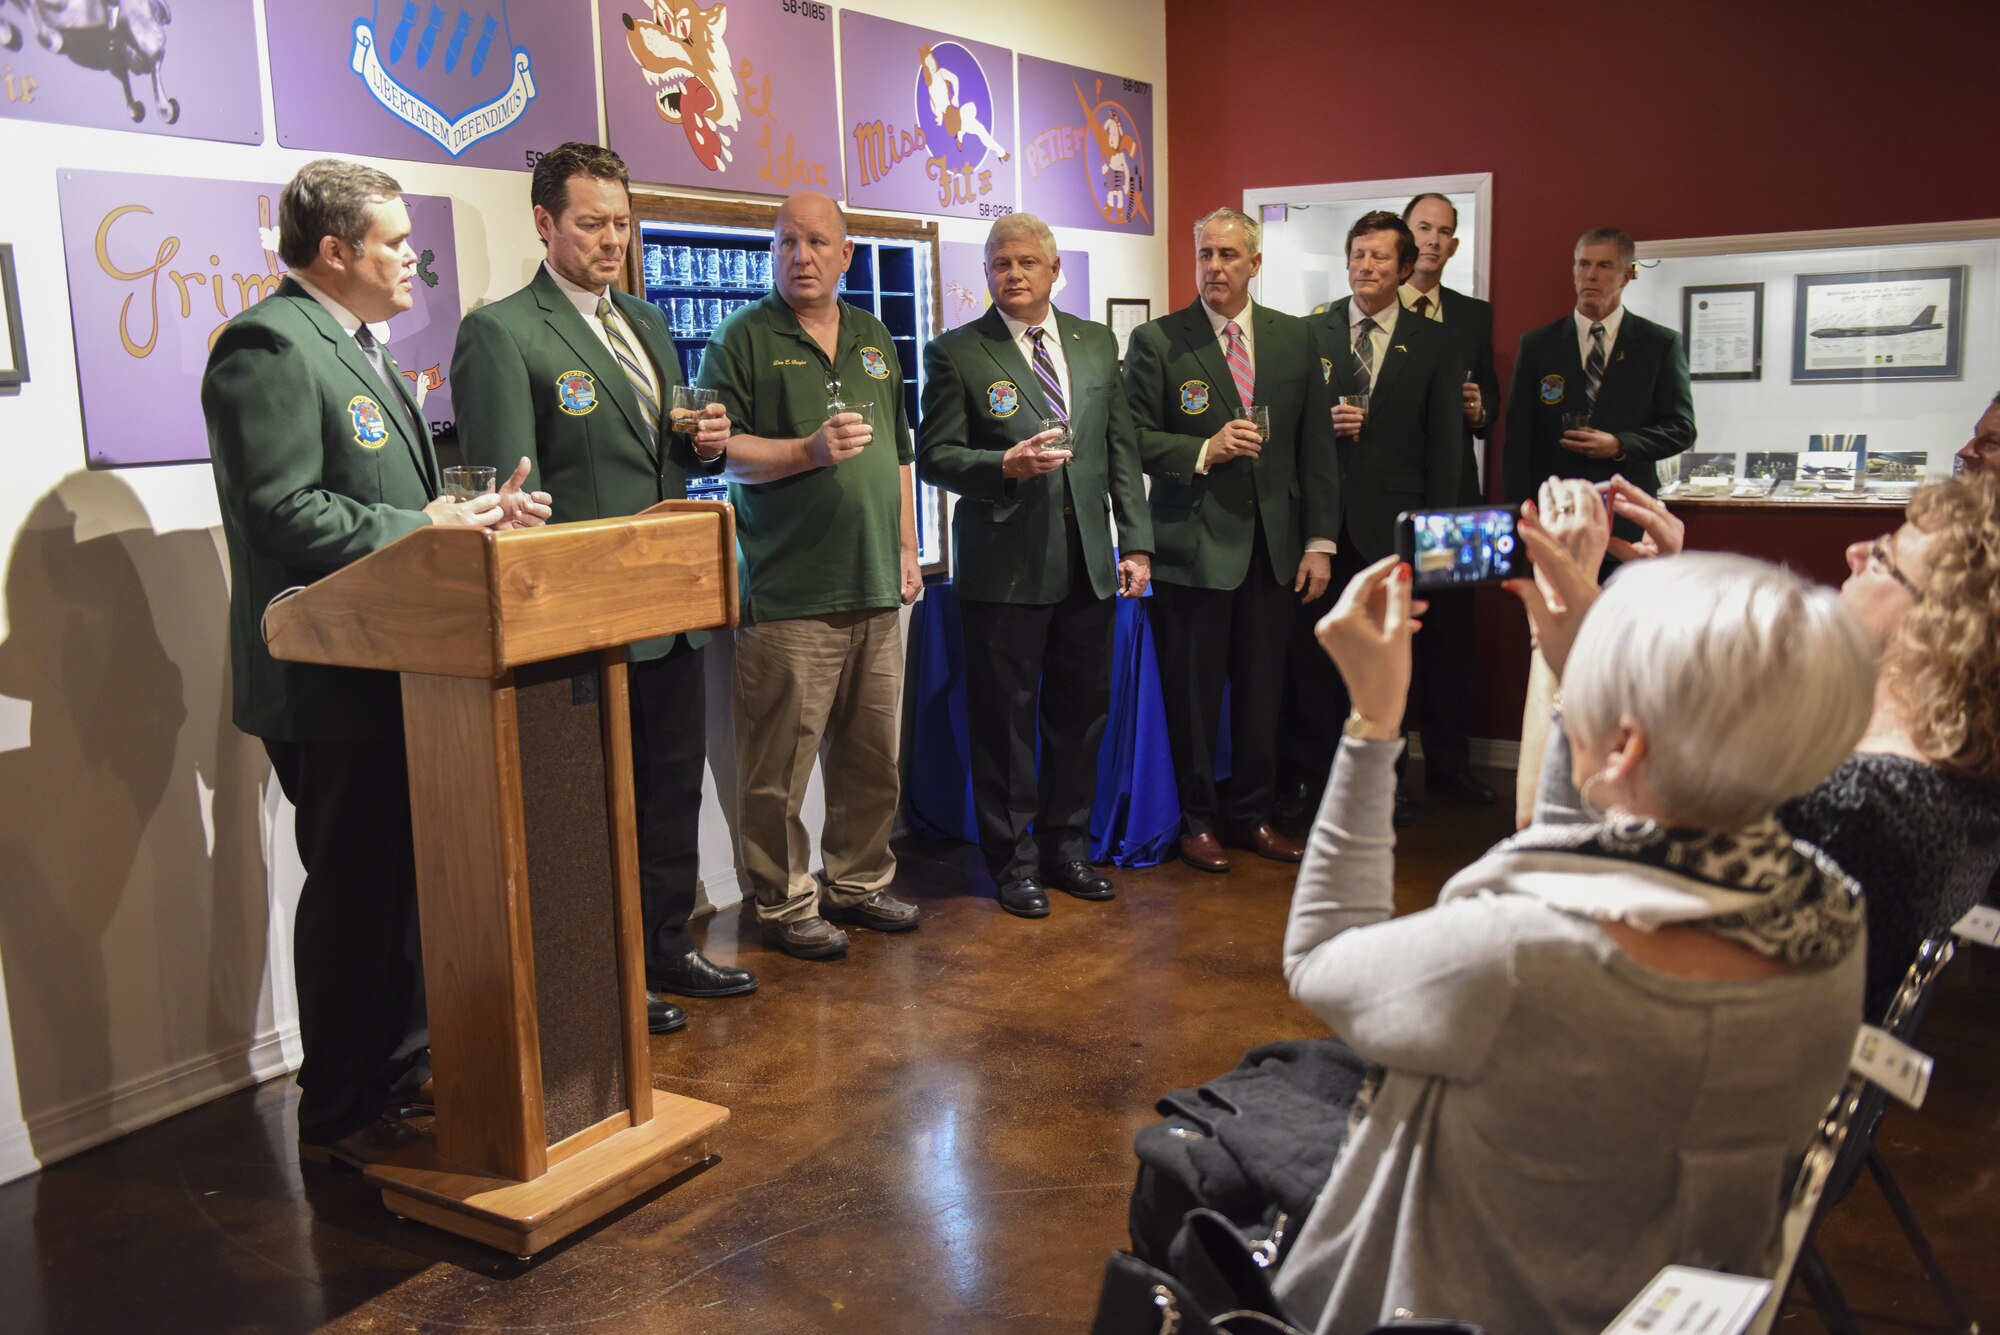 Crewmembers from Operation Secret Squirrel give a toast during the 26th anniversary of Operation Secret Squirrel at Barksdale Air Force Base, La., Jan. 17, 2017. The aircraft that supported the operation, Jan. 16, 1991, were the first combat sorties launched for the liberation of Kuwait in support of Operation Desert Storm, and at the time marked the longest combat sortie flight totaling 14,000 miles in 35 hours and 24 minutes. (U.S. Air Force photo/Airman 1st Class Alexis Schultz)